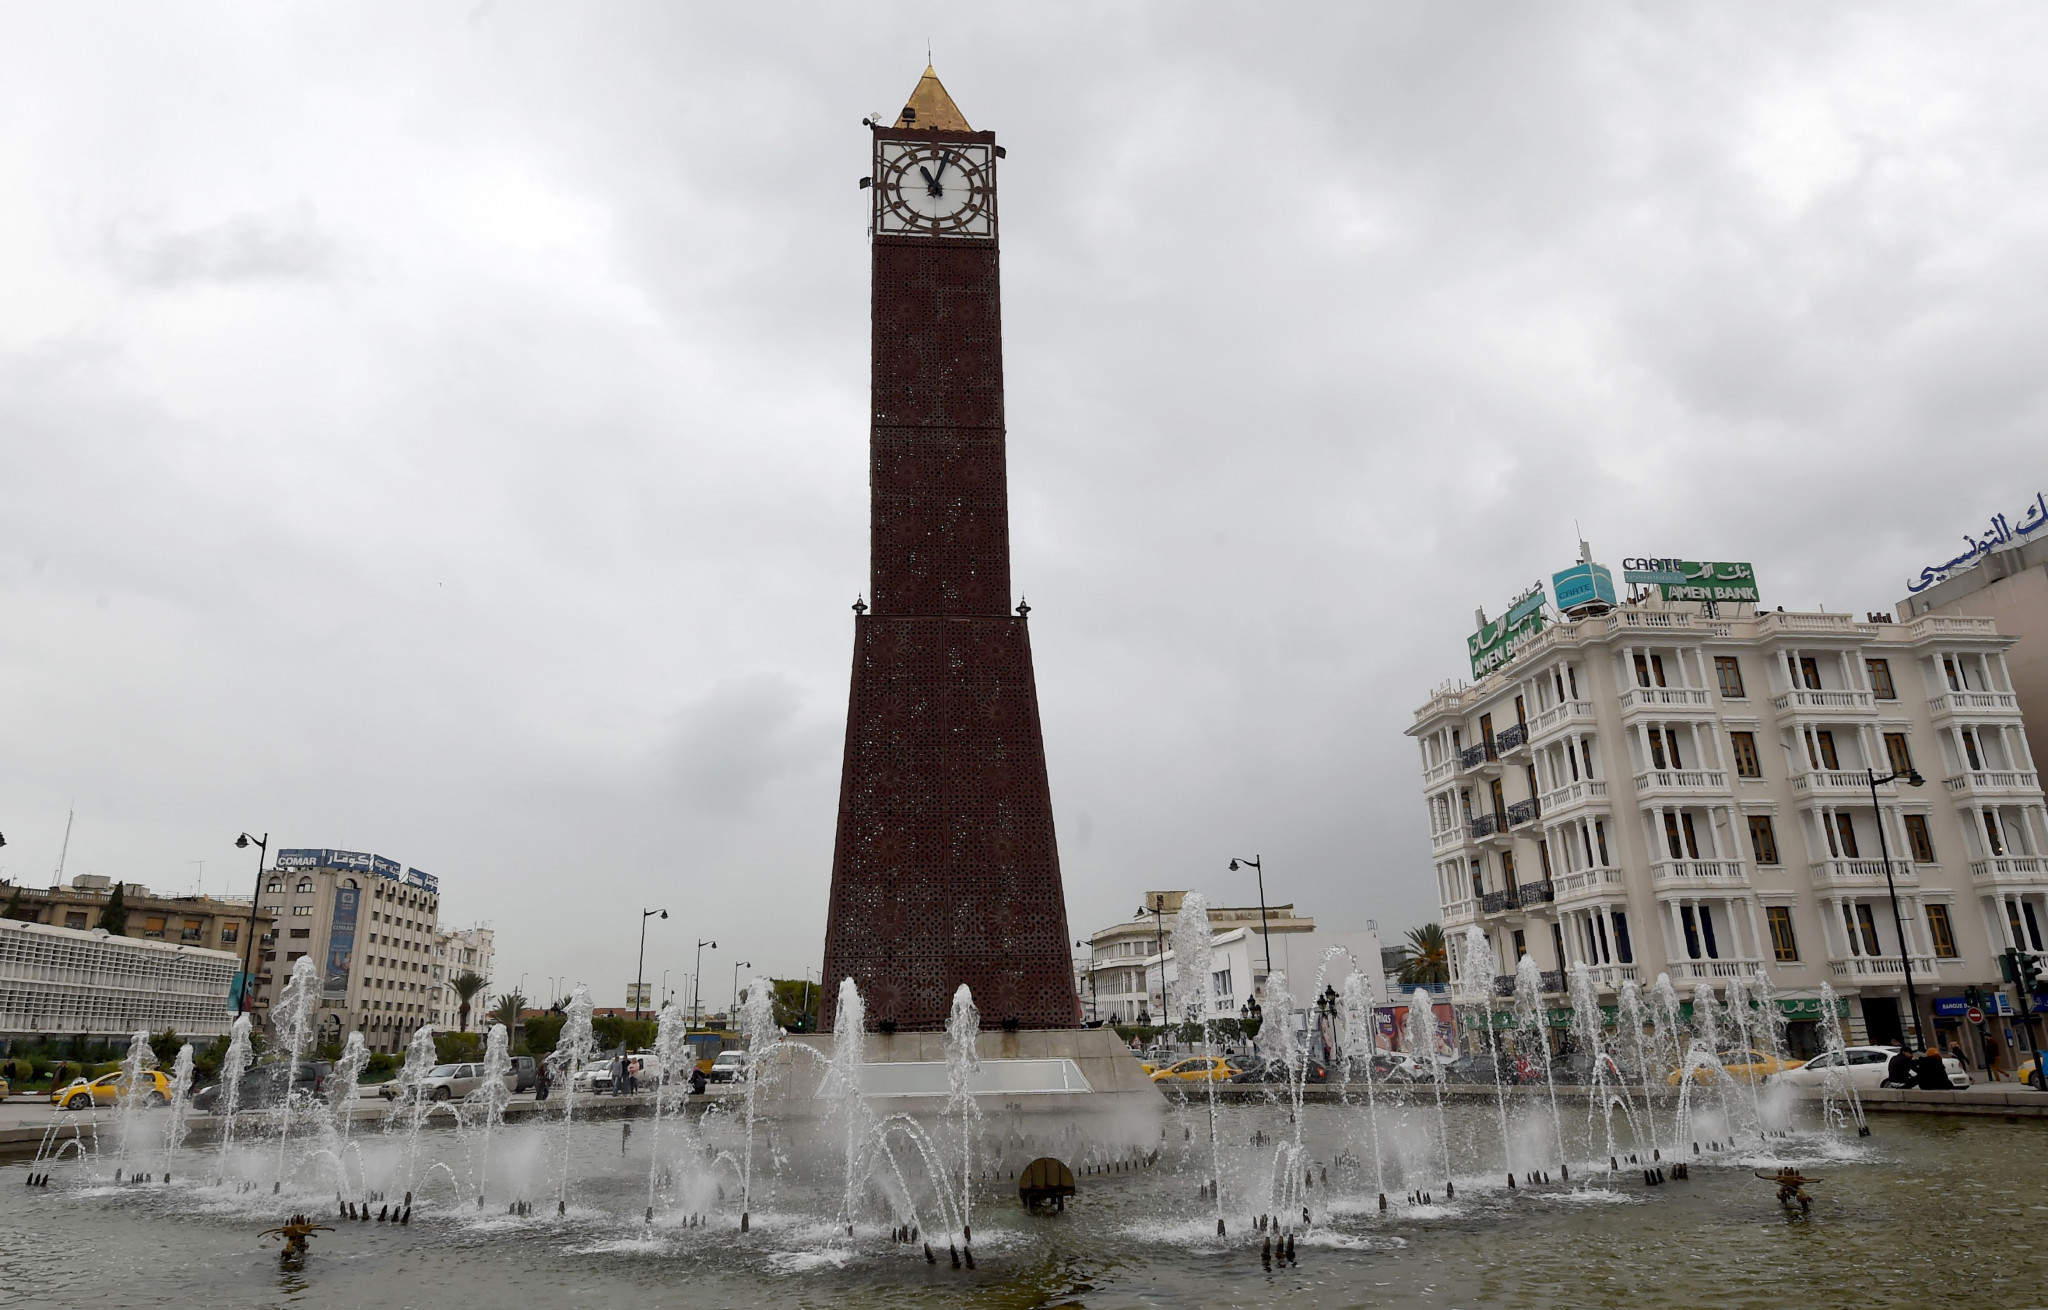 Tunis in Tunisia has been officially reinstated in the race for the 2022 Summer Youth Olympic Games ©Getty Images